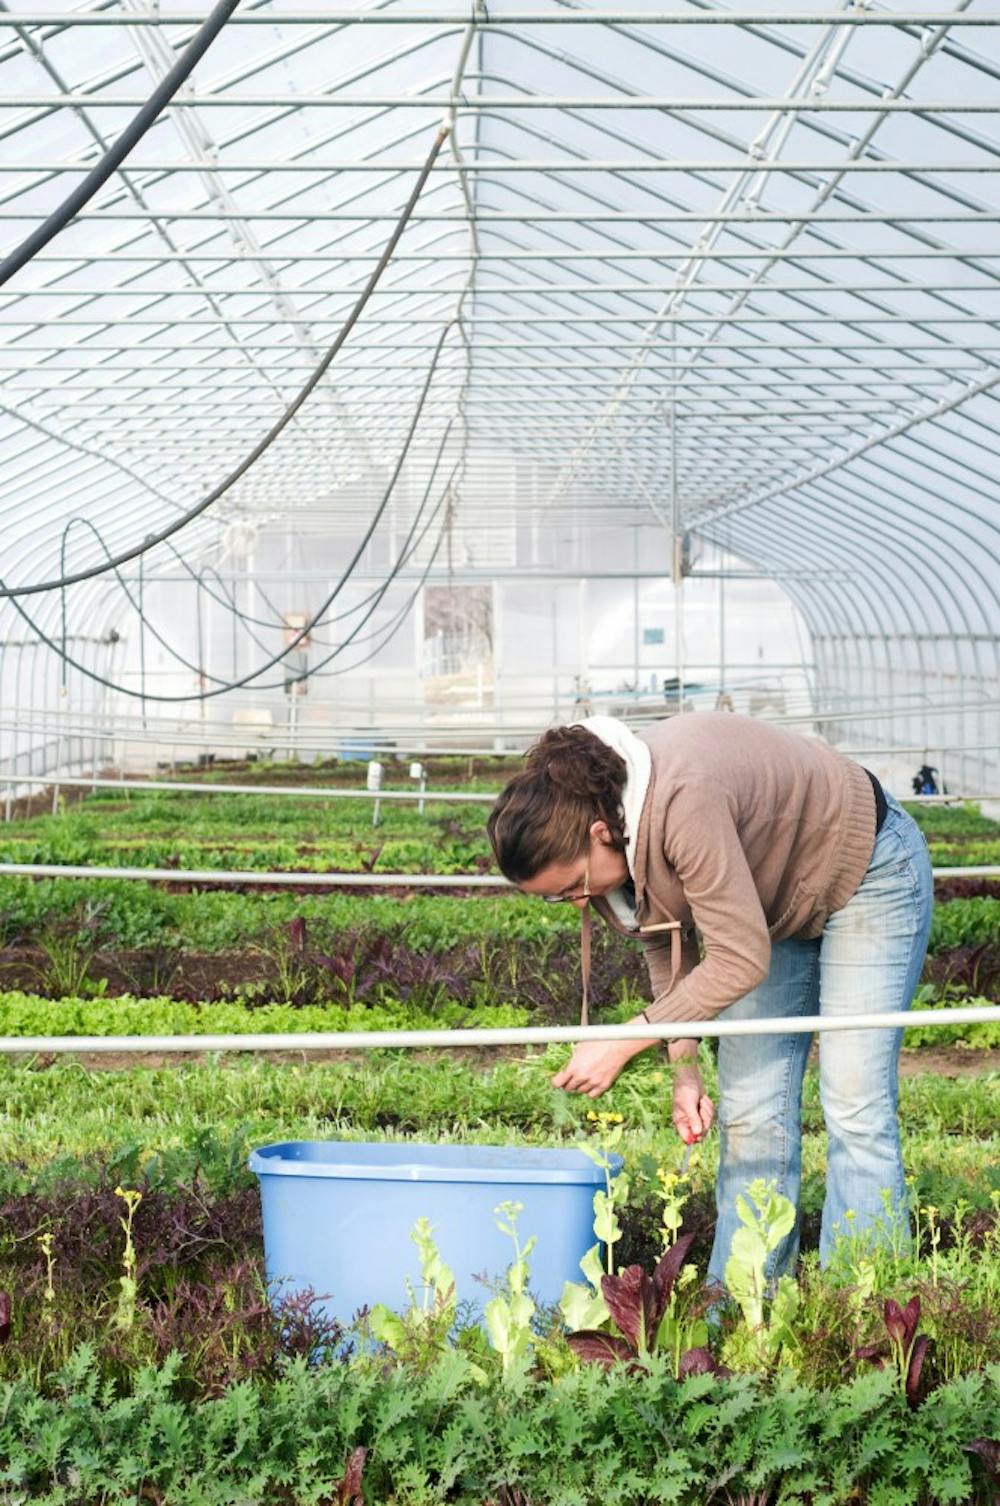 	<p>Jamie Carnevale, as part of the Organic Farmer Training Program, harvests plants in one of the greenhouse at the <span class="caps">MSU</span> Student Organic Farm on Thursday morning. When the weather is warm enough, the plants from the greenhouse will be transferred outdoors to be planted. </p>